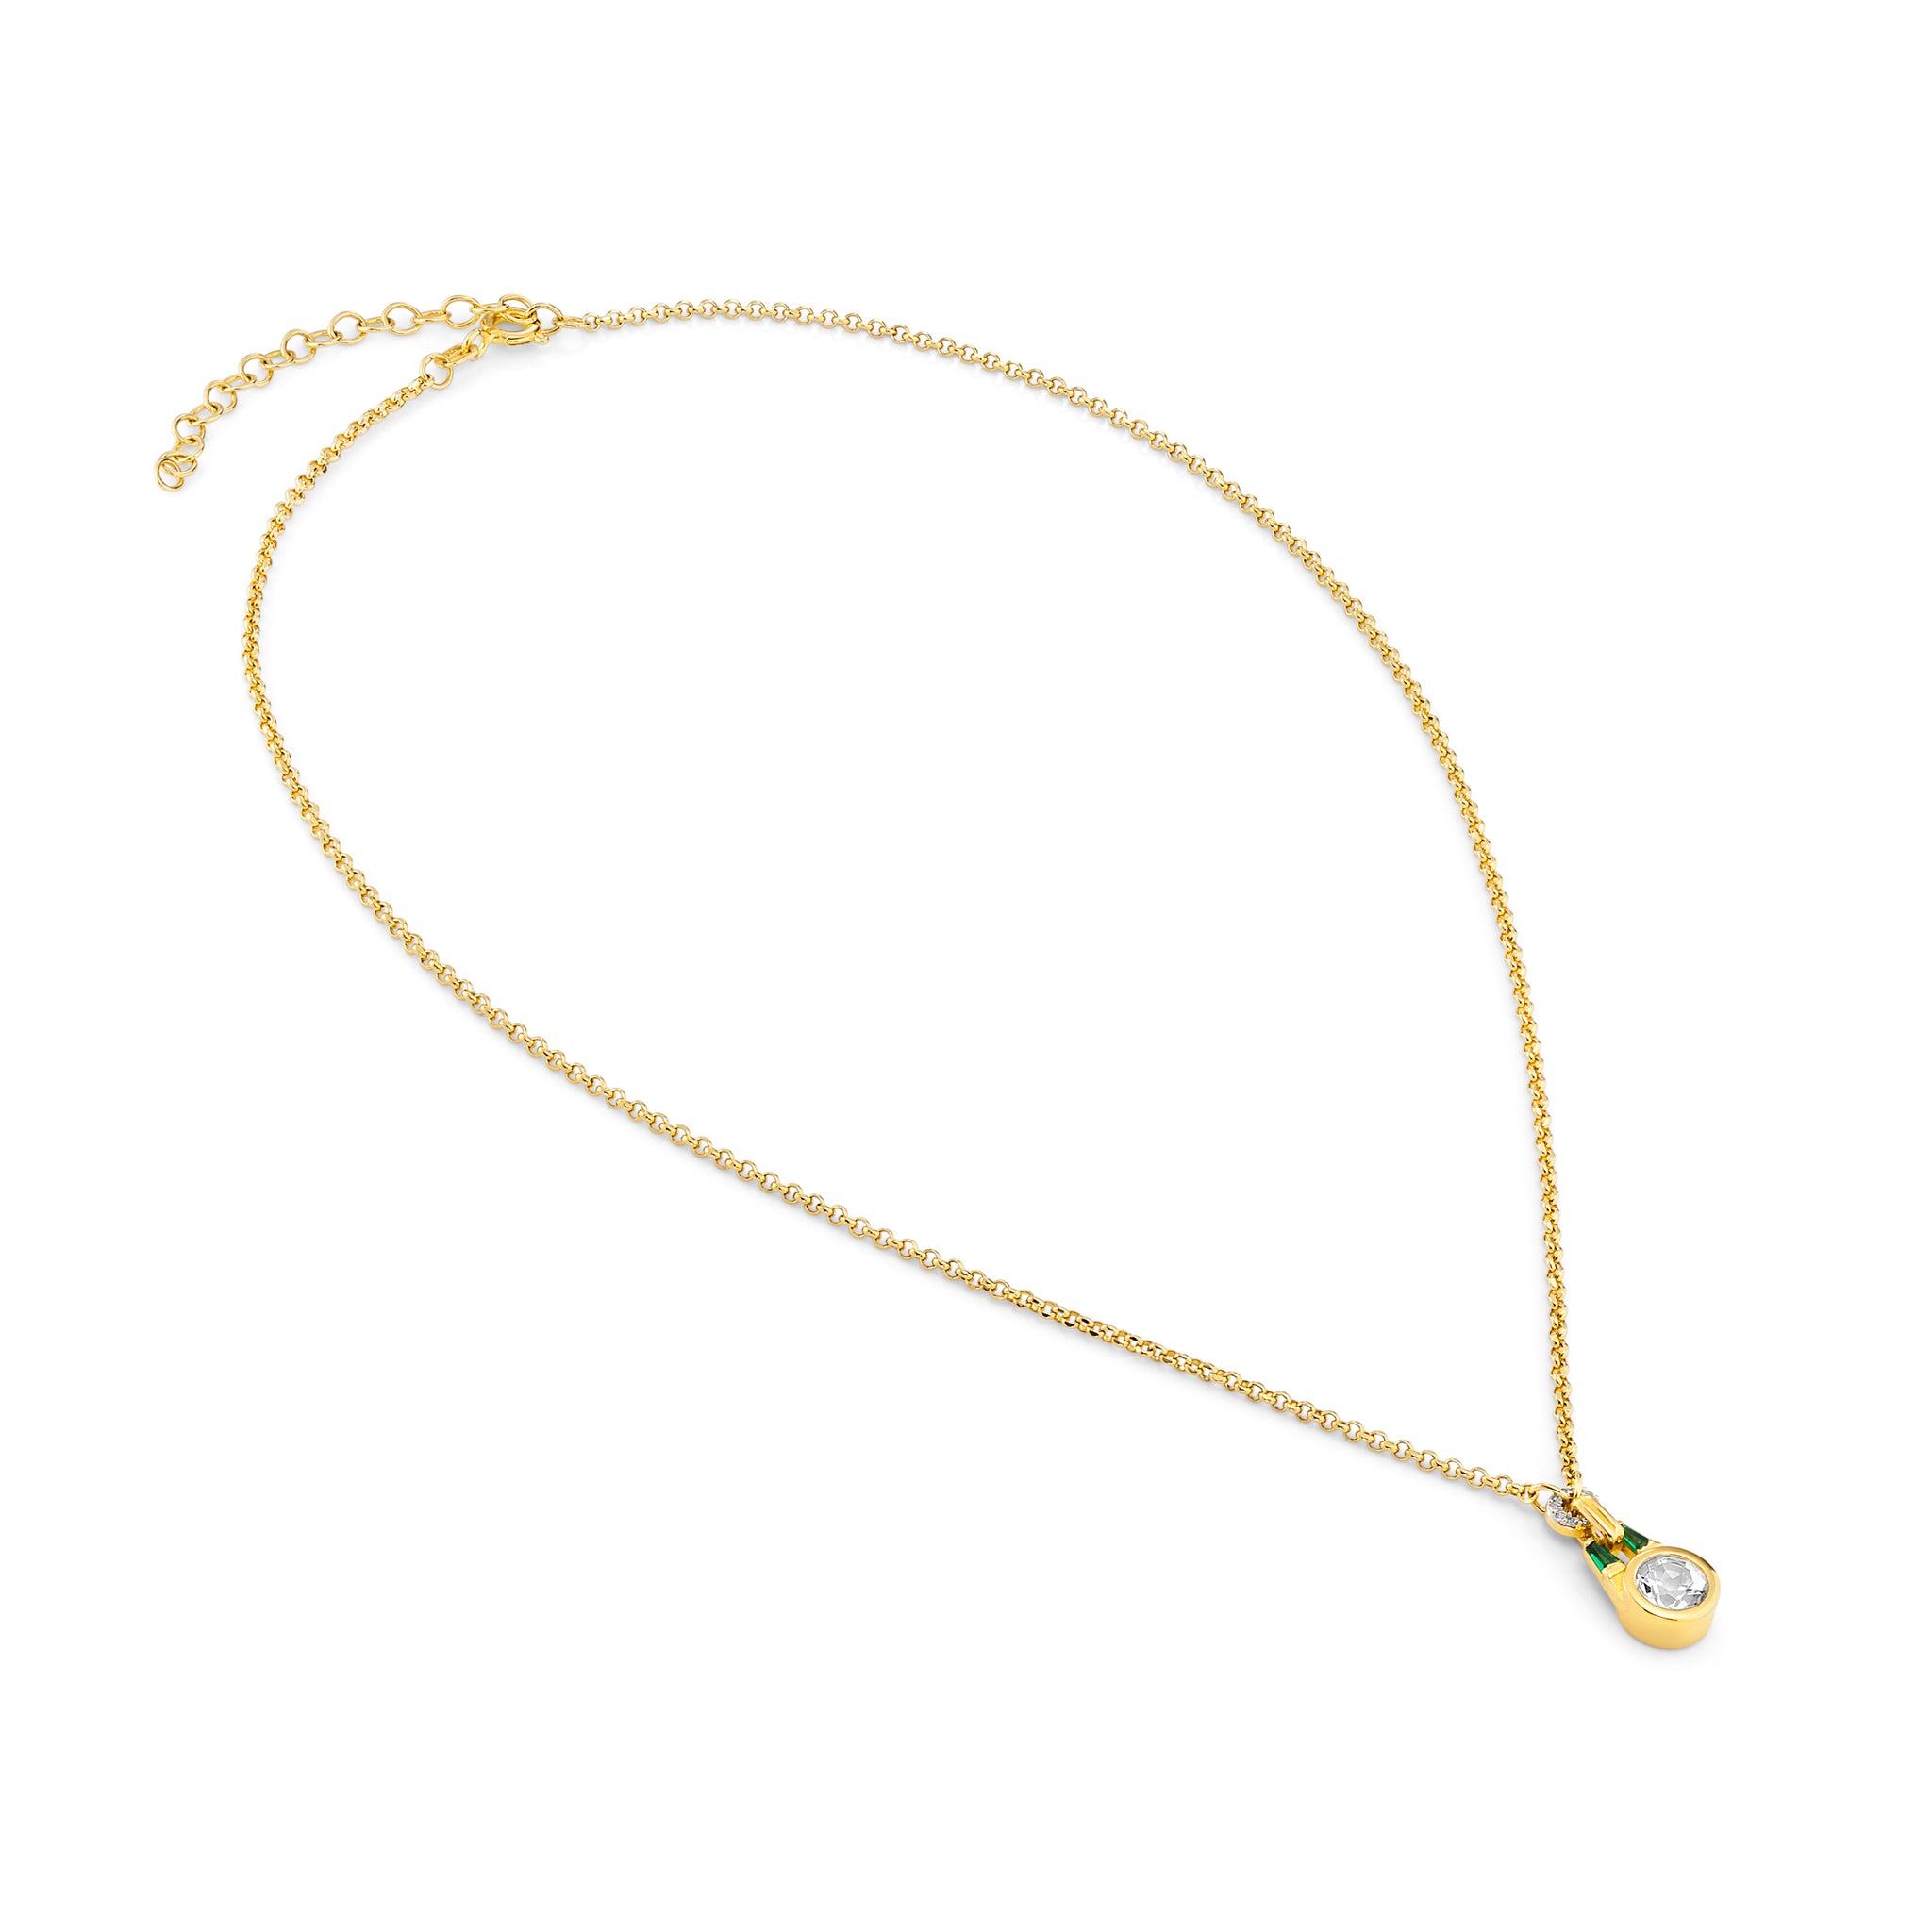 Olive Gold Necklace in White Topaz + Emerald Green Stone